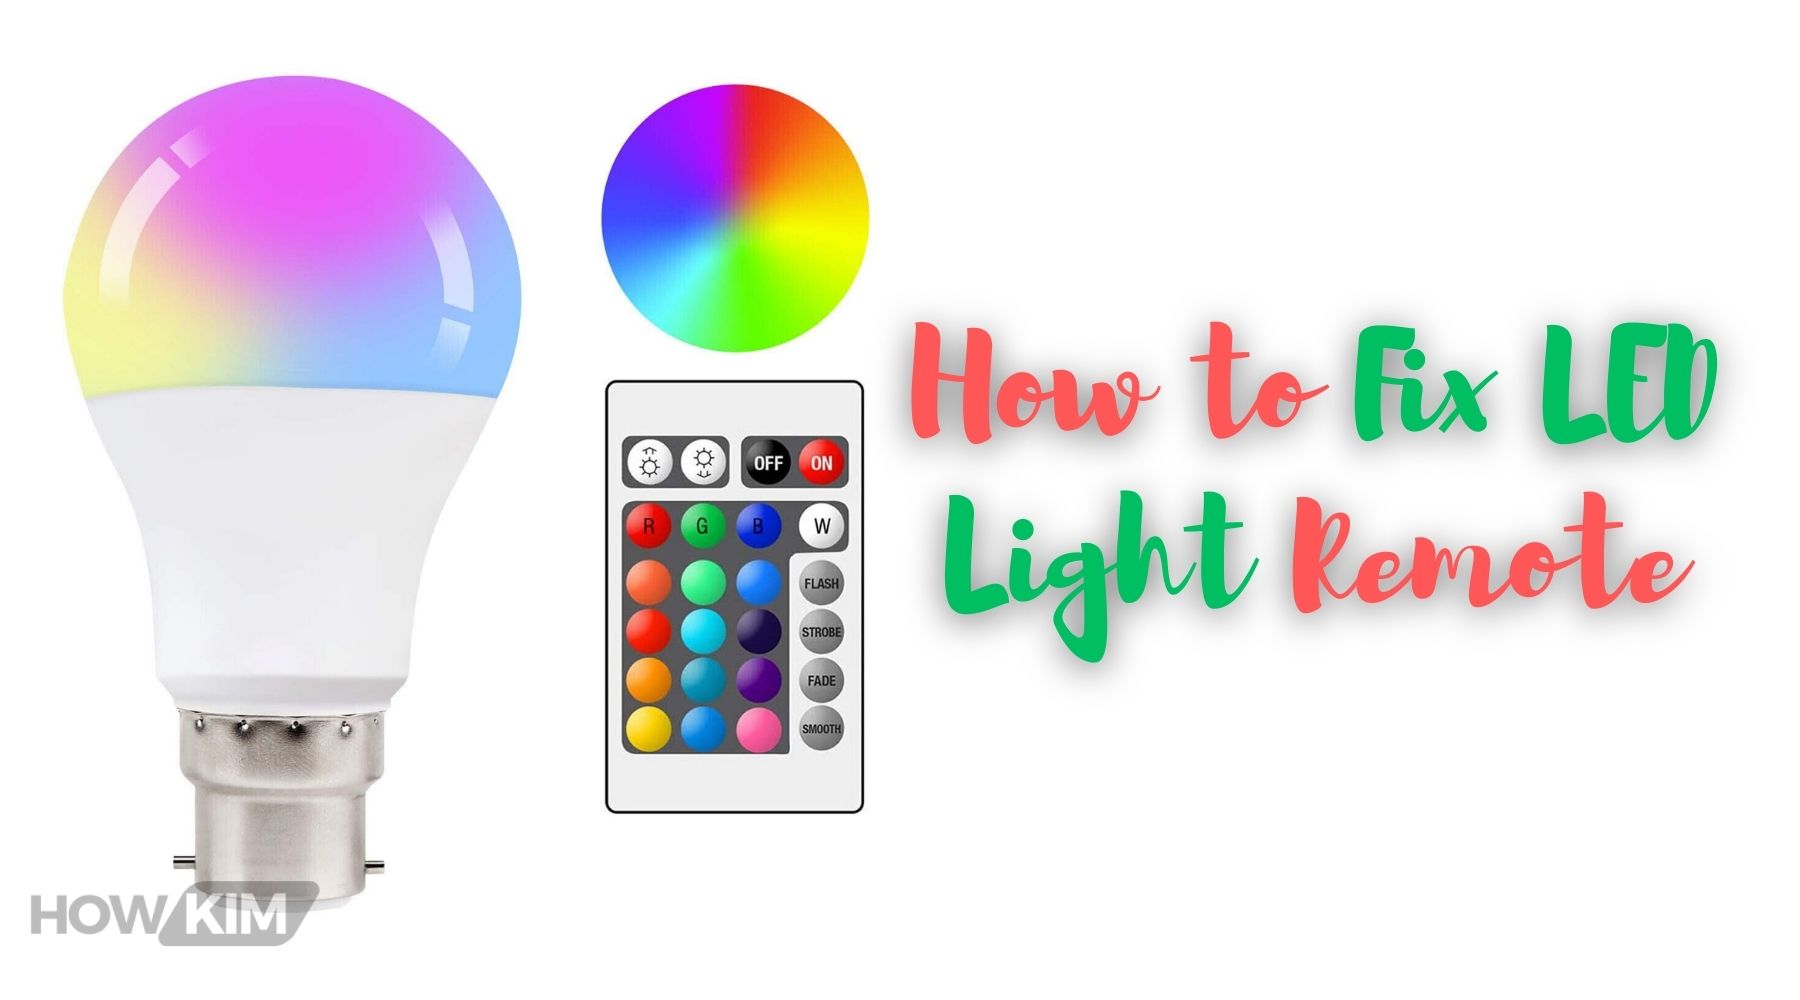 How to Fix LED Light Remote